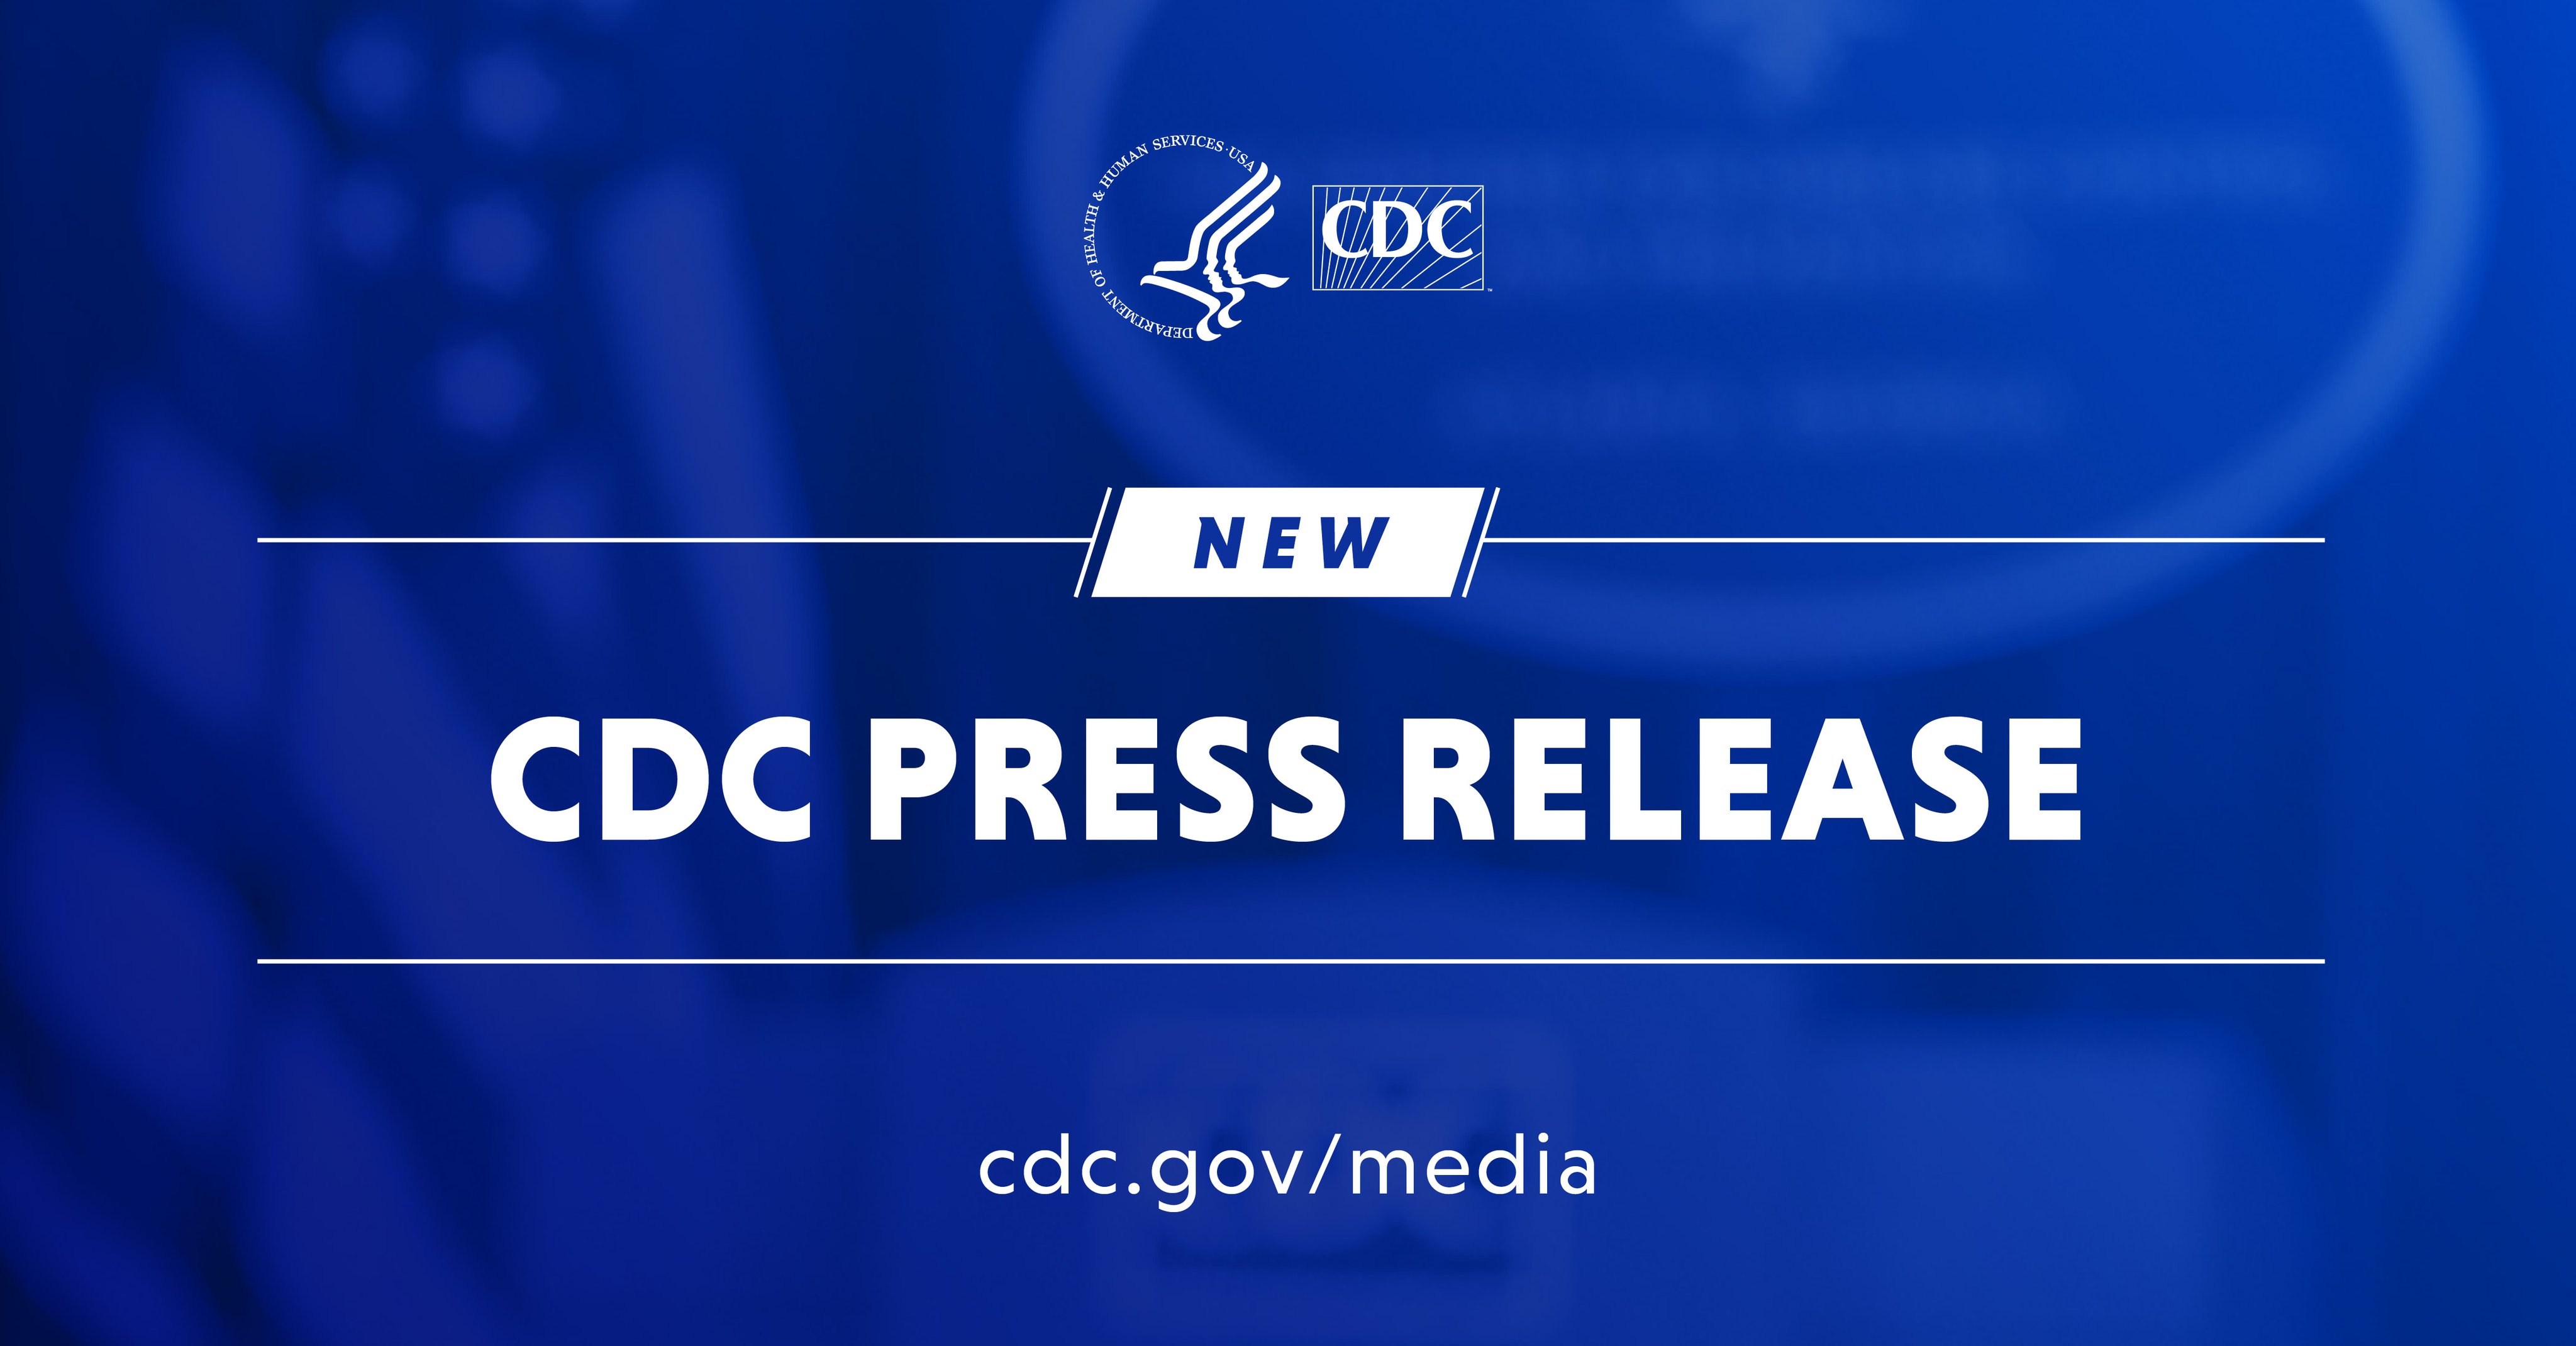 A blue background featuring the CDC logo and accompanying text that reads "New CDC Press Release" and a web link cdc.gov/media